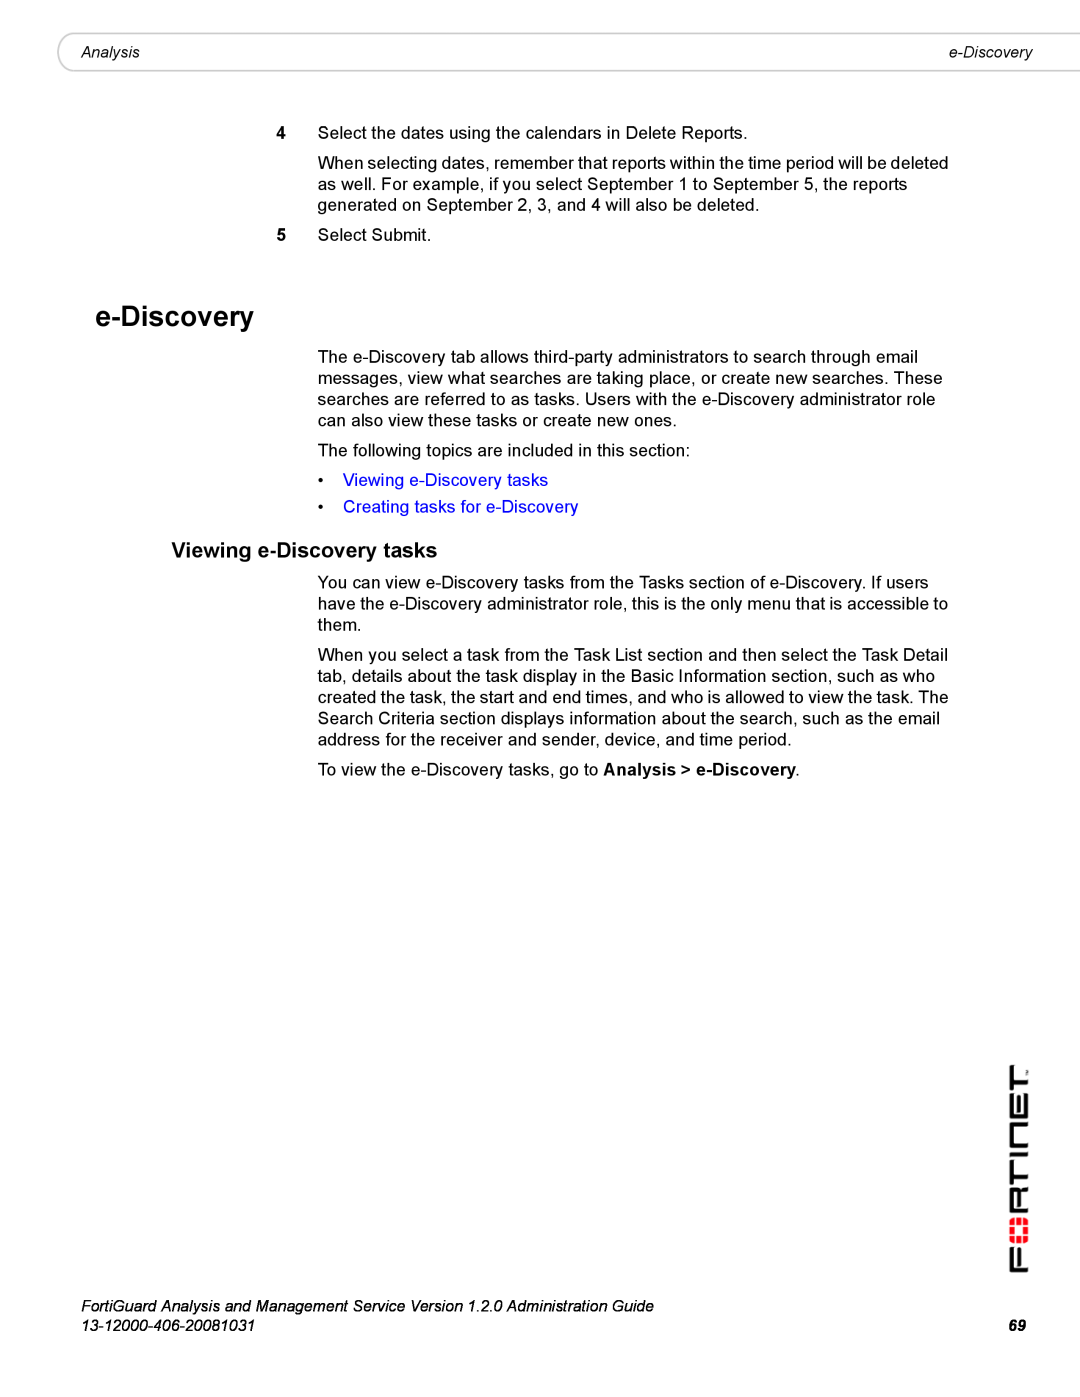 Fortinet 1.2.0 manual Viewing e-Discovery tasks Creating tasks for e-Discovery 